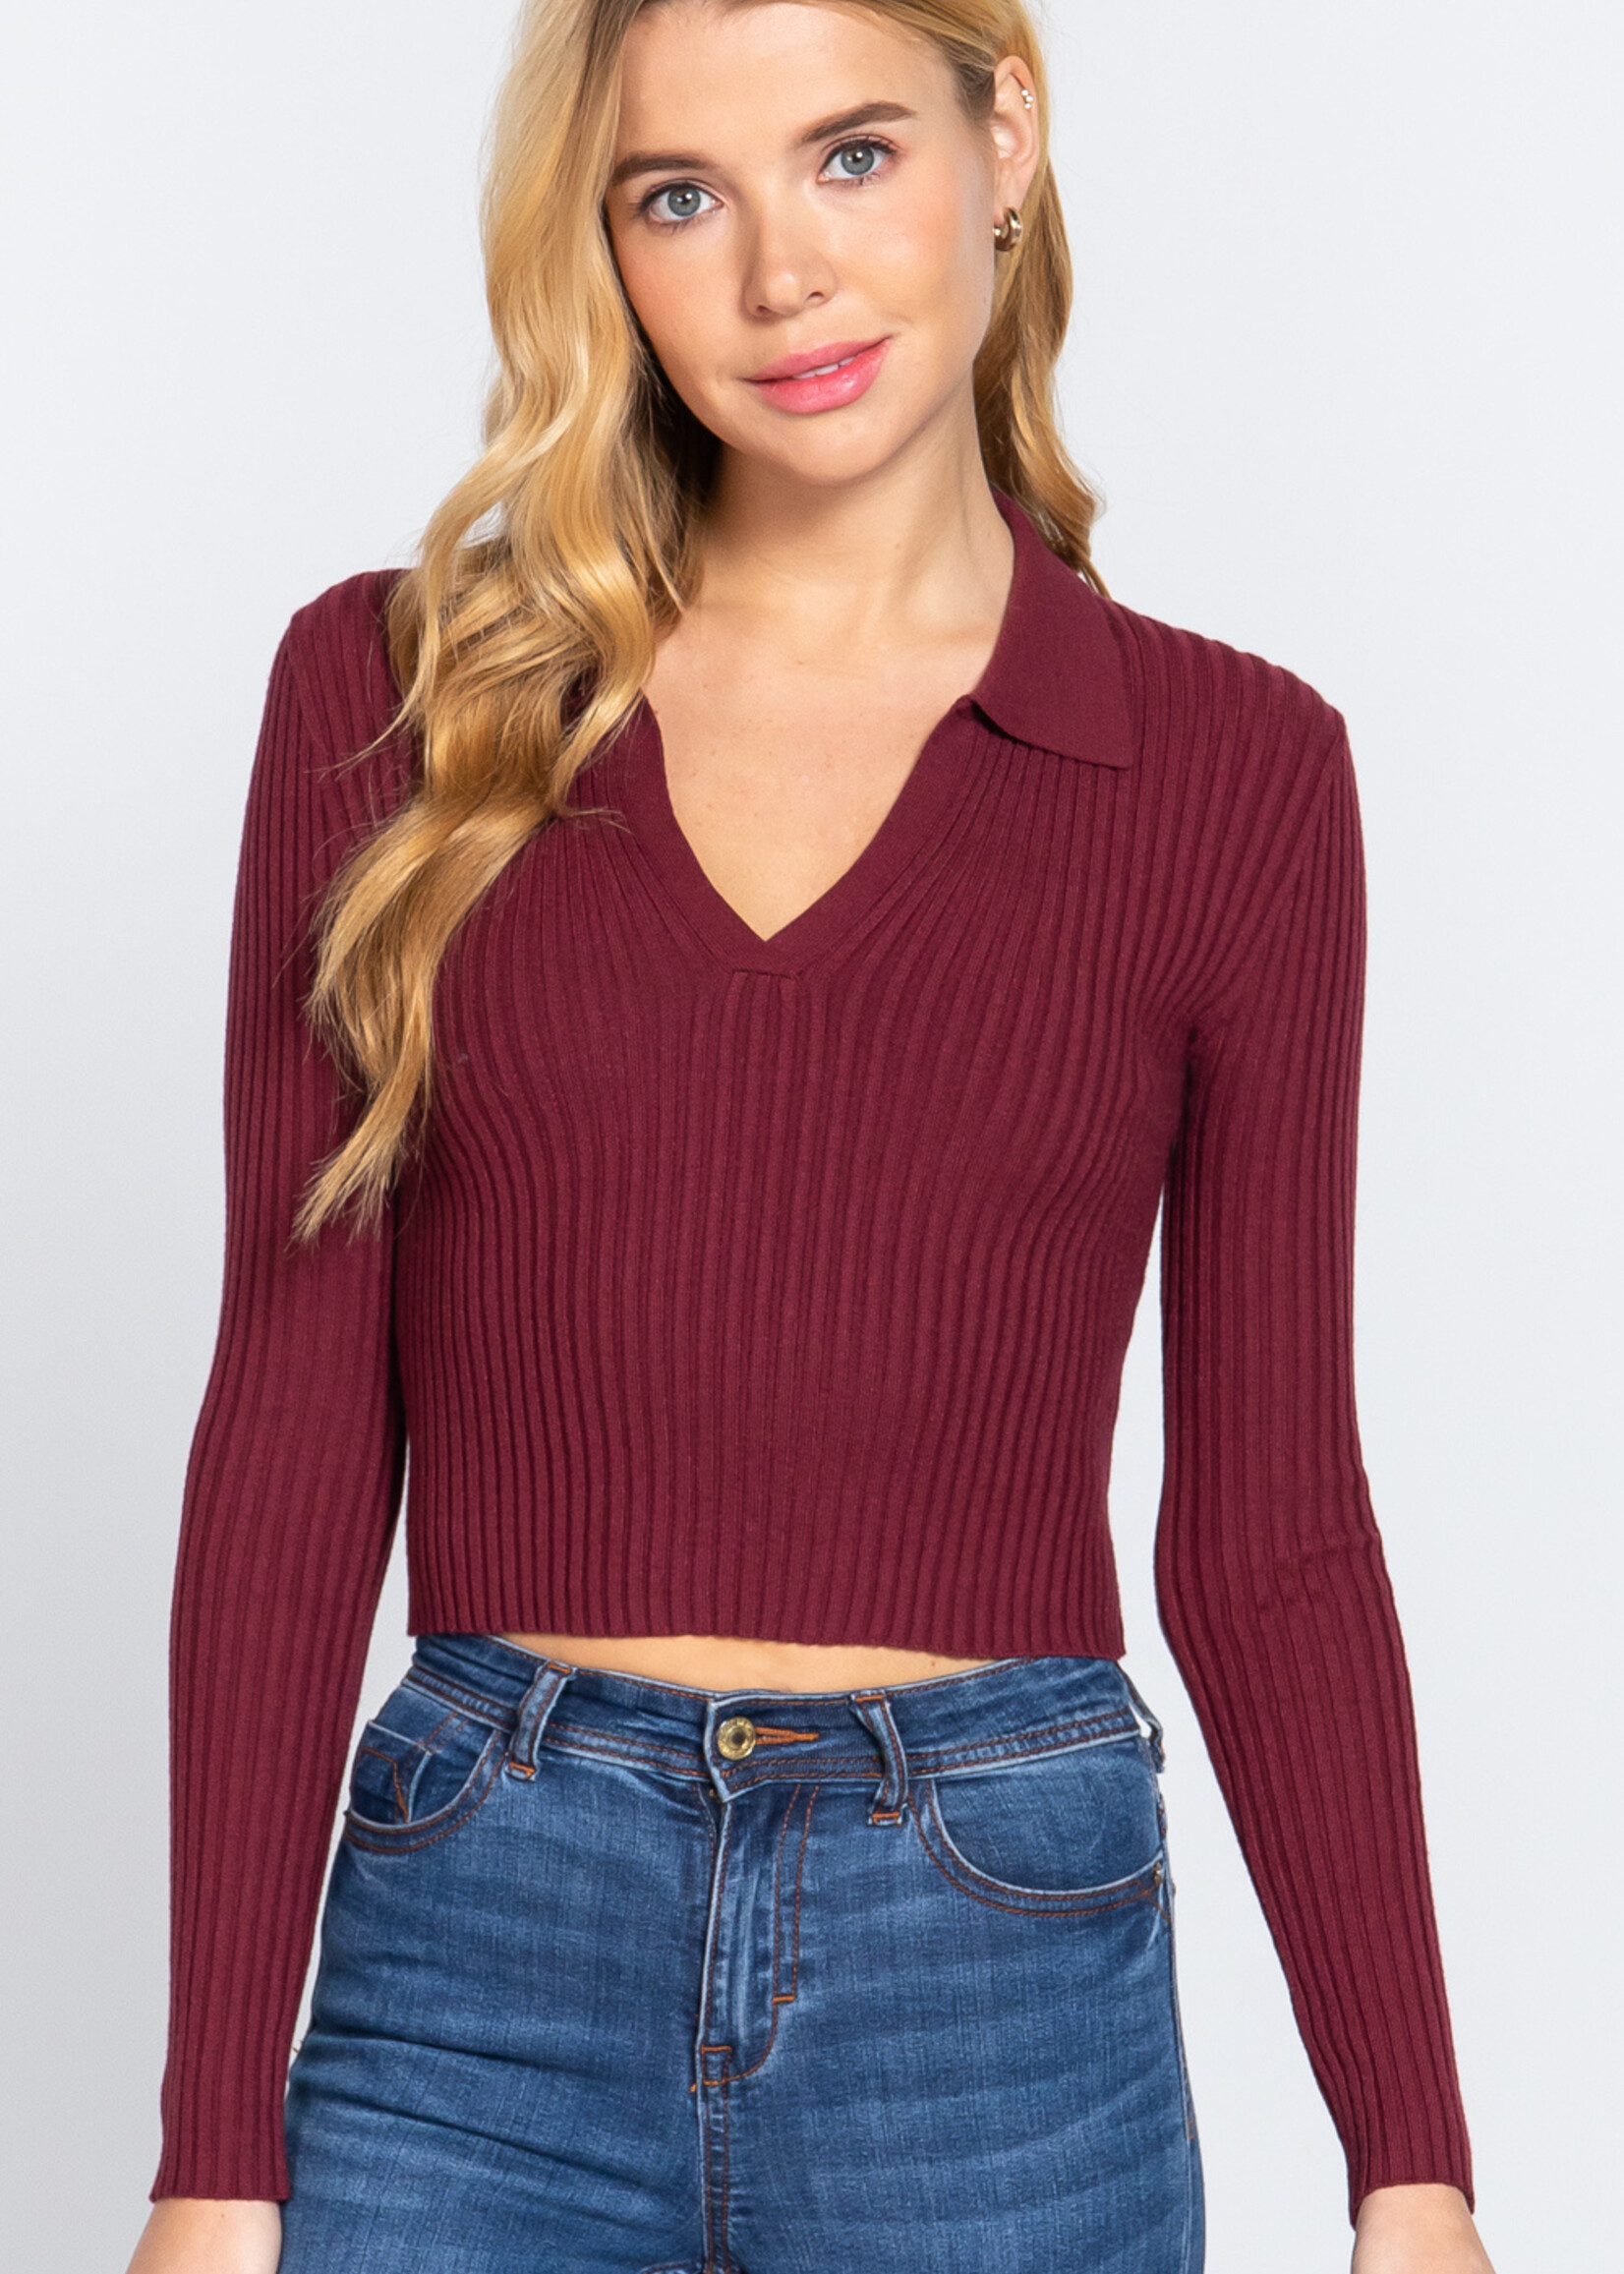 Women's V-Neck Pullover Sweater - Knox Rose Tan XS 